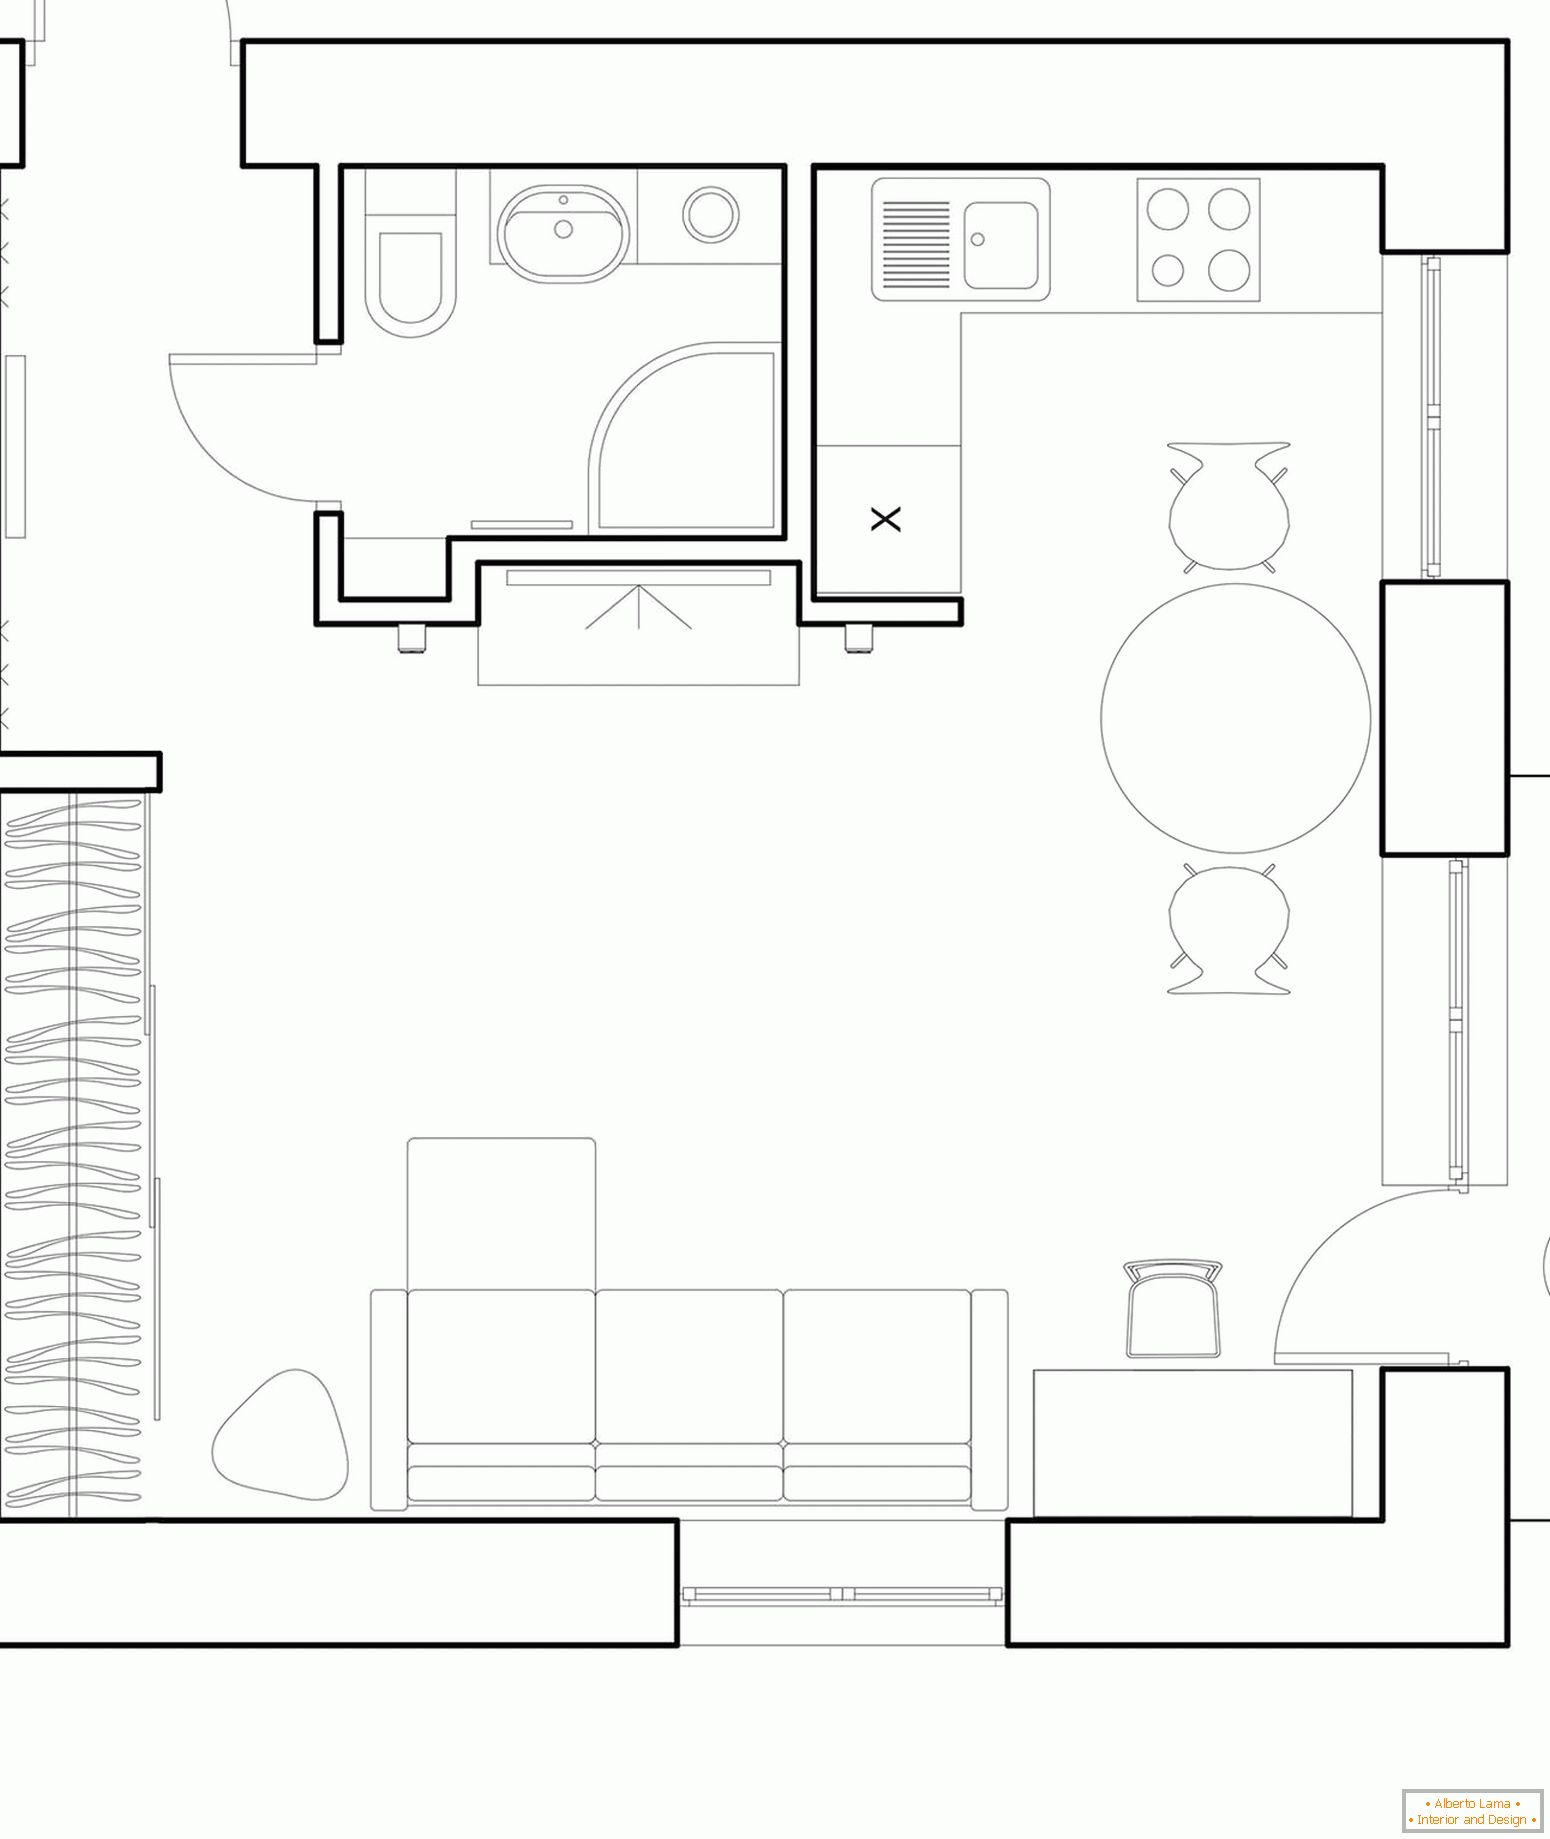 The layout of the studio apartment in Khrushchev